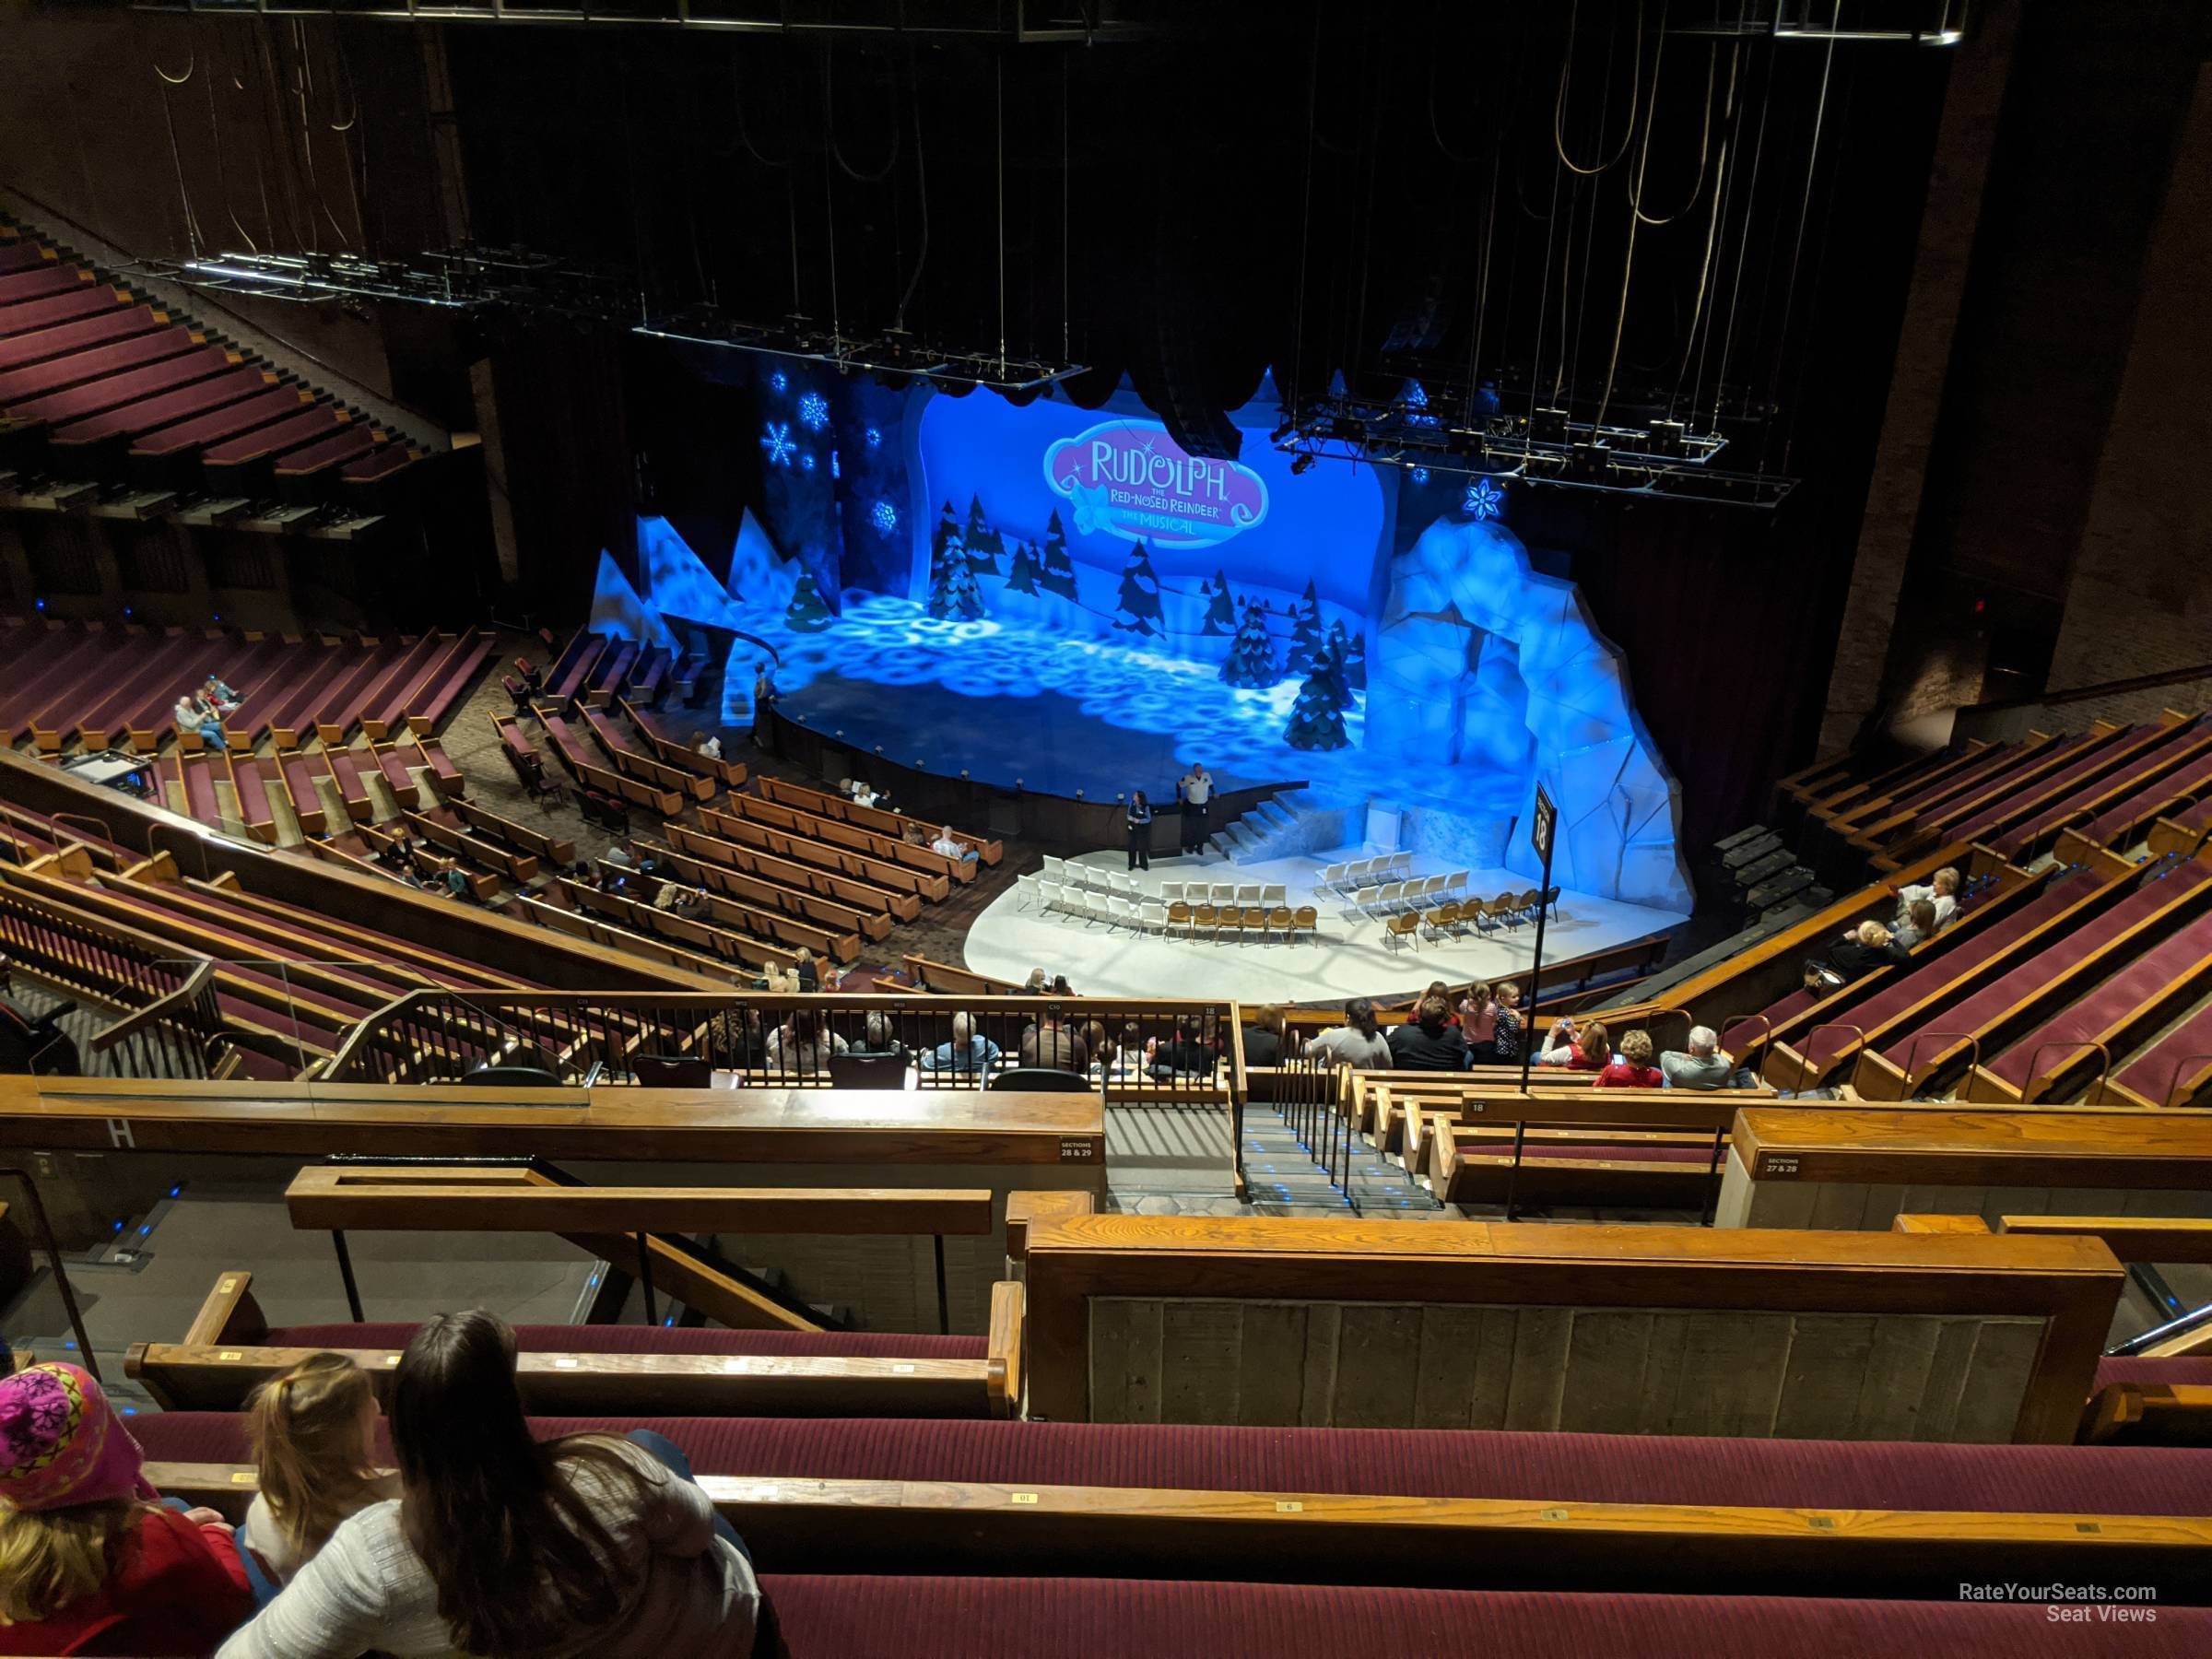 section 28, row p seat view  - grand ole opry house